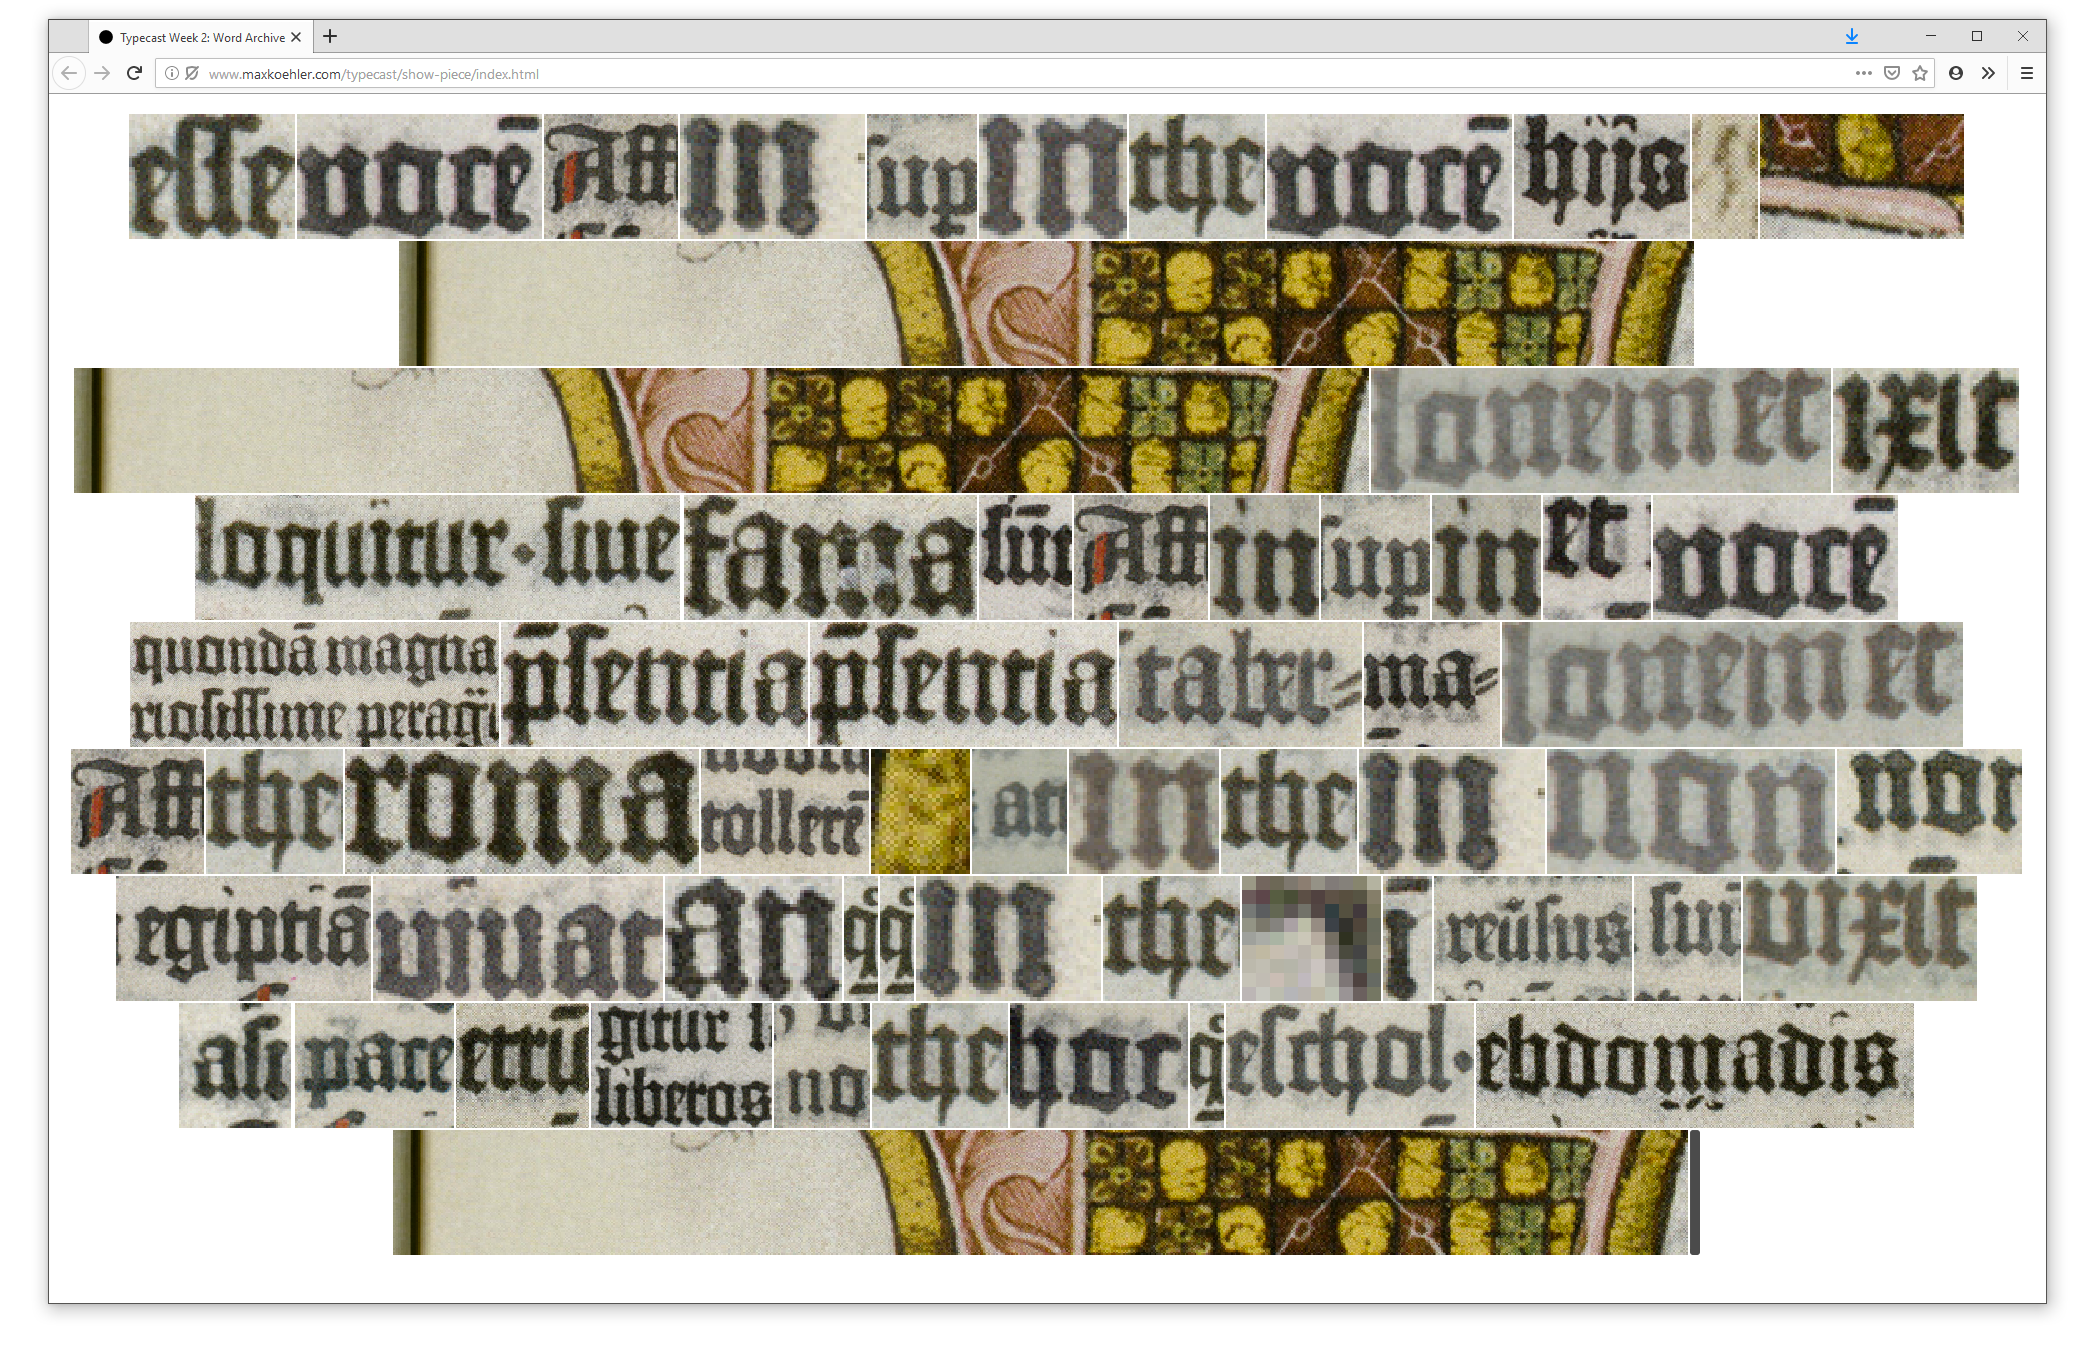 Web application showing words from the Gutenberg Bible